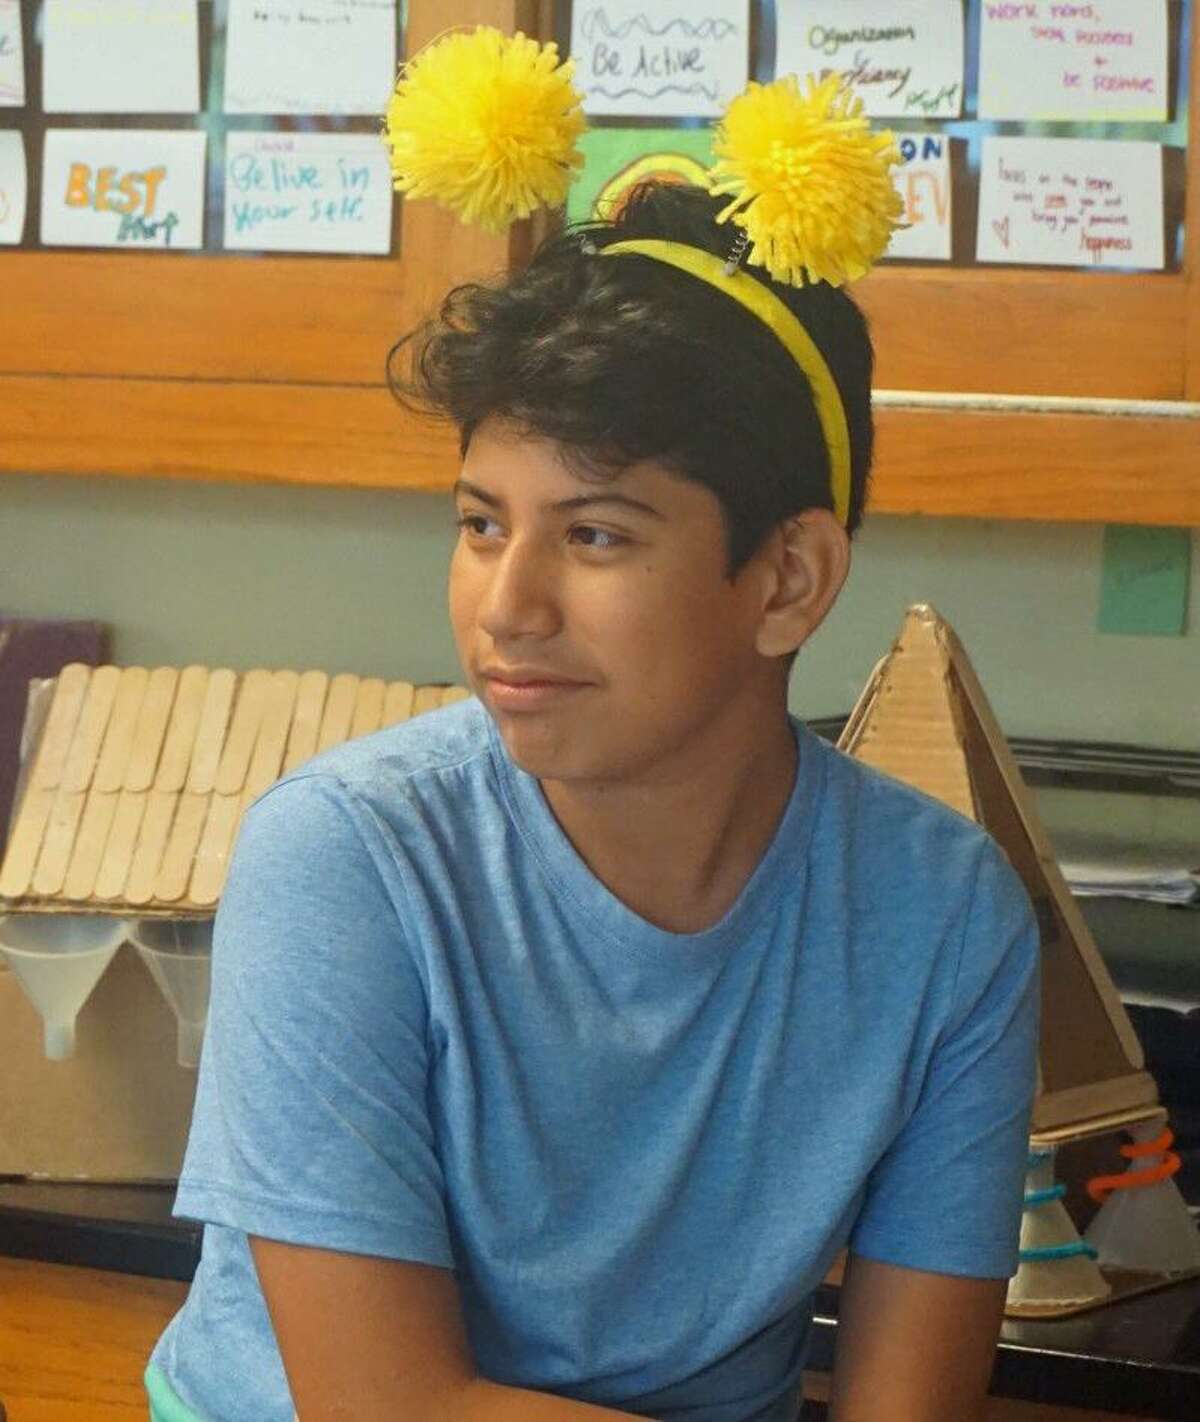 Eighth grader Leo Cruz-Zurita looks on as classmates participate in a morning of social and emotional learning activities at Western Middle School on Sept. 27.